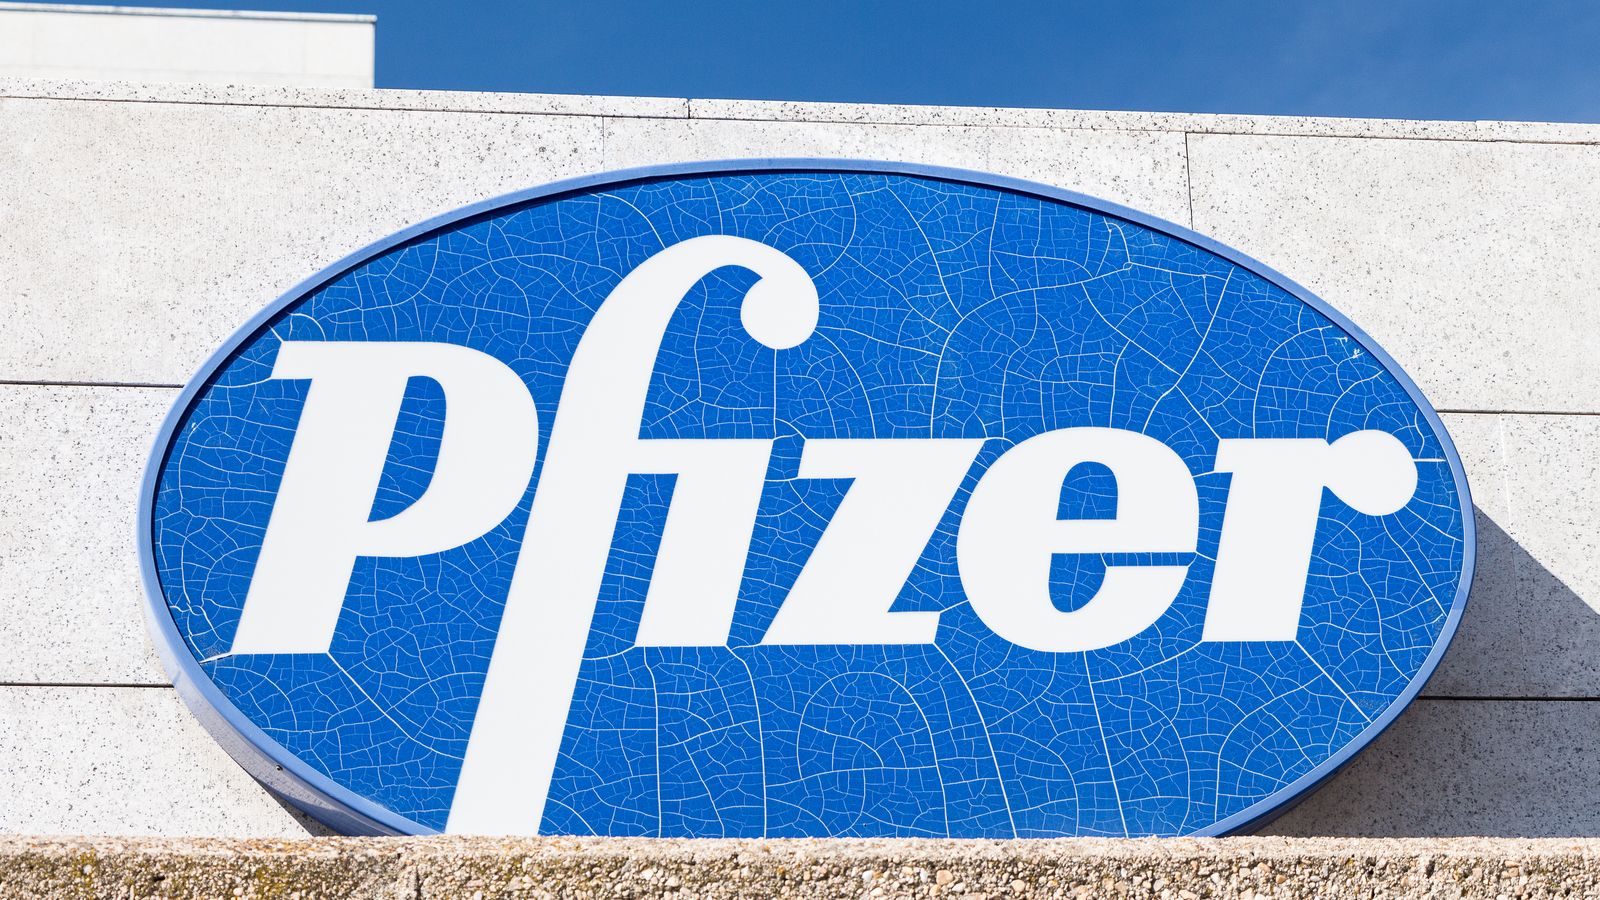 Here’s How Pfizer Stock (and Pharma) Stand to Benefit From Mylan Deal